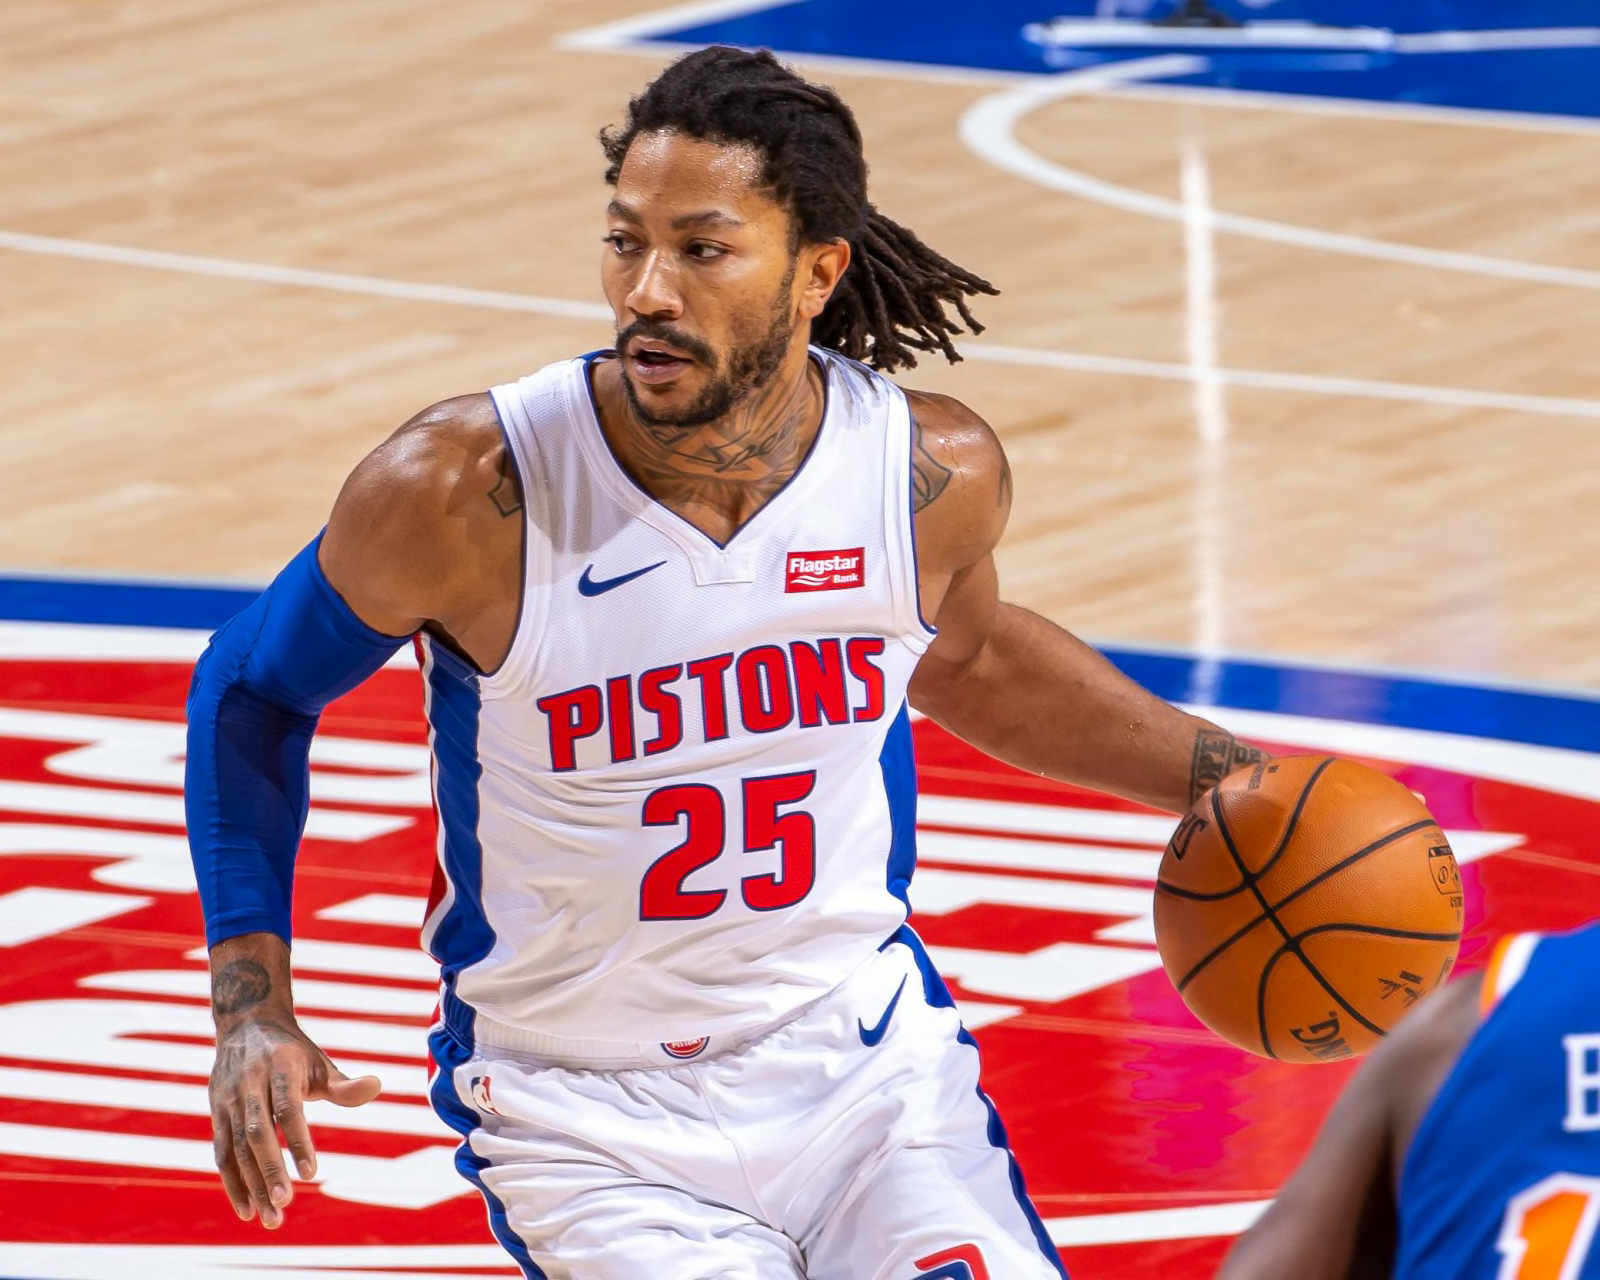 Derrick Rose Reportedly Headed to Memphis Grizzlies